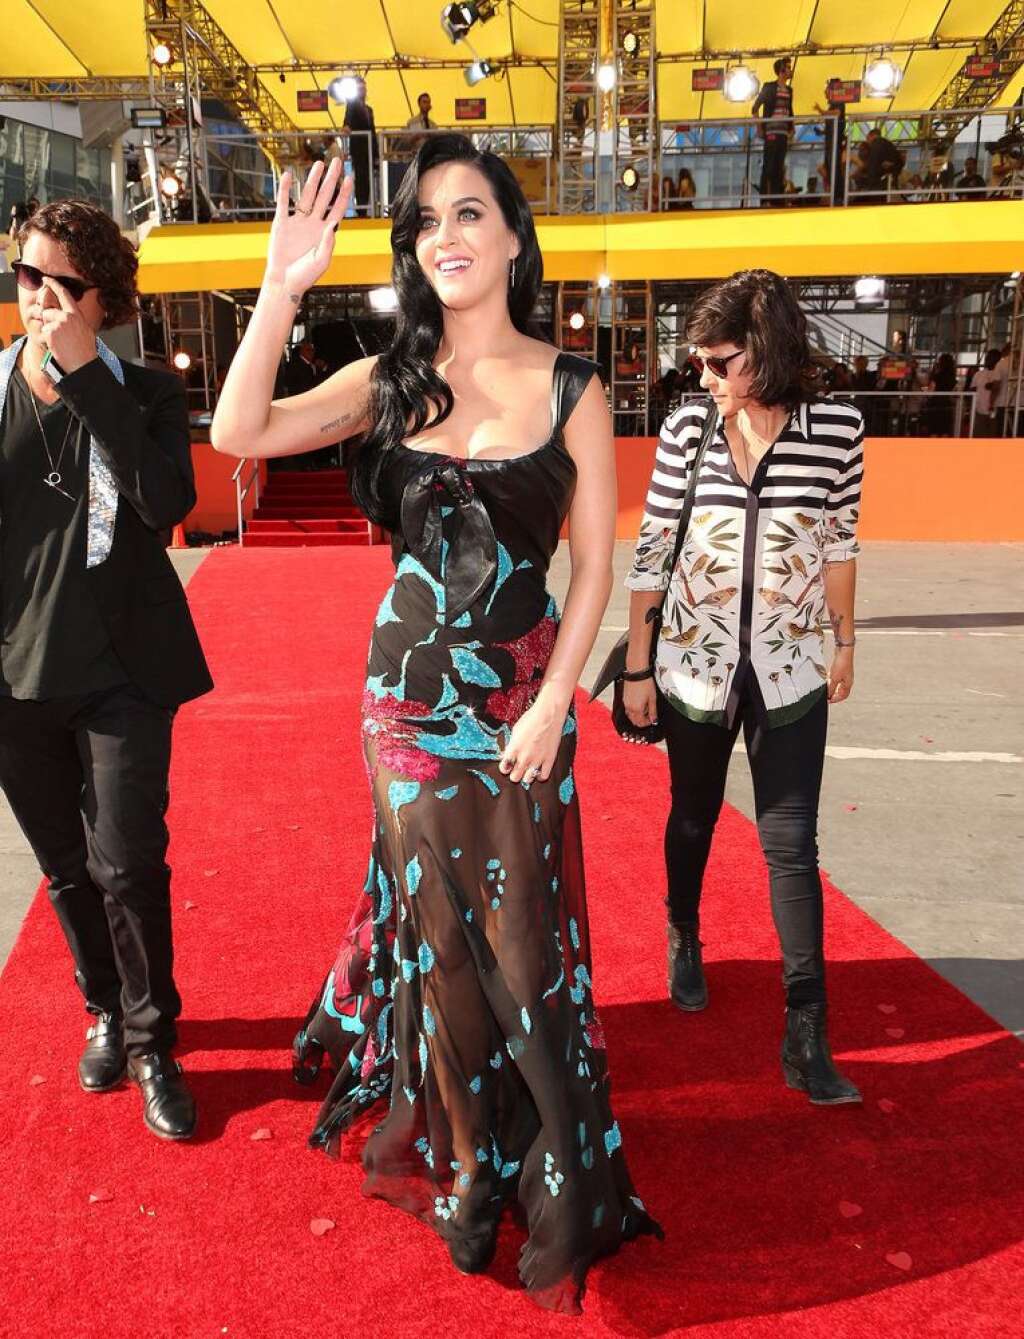 2012 MTV Video Music Awards - Red Carpet - LOS ANGELES, CA - SEPTEMBER 06:  Singer Katy Perry arrives at the 2012 MTV Video Music Awards at Staples Center on September 6, 2012 in Los Angeles, California.  (Photo by Christopher Polk/Getty Images)